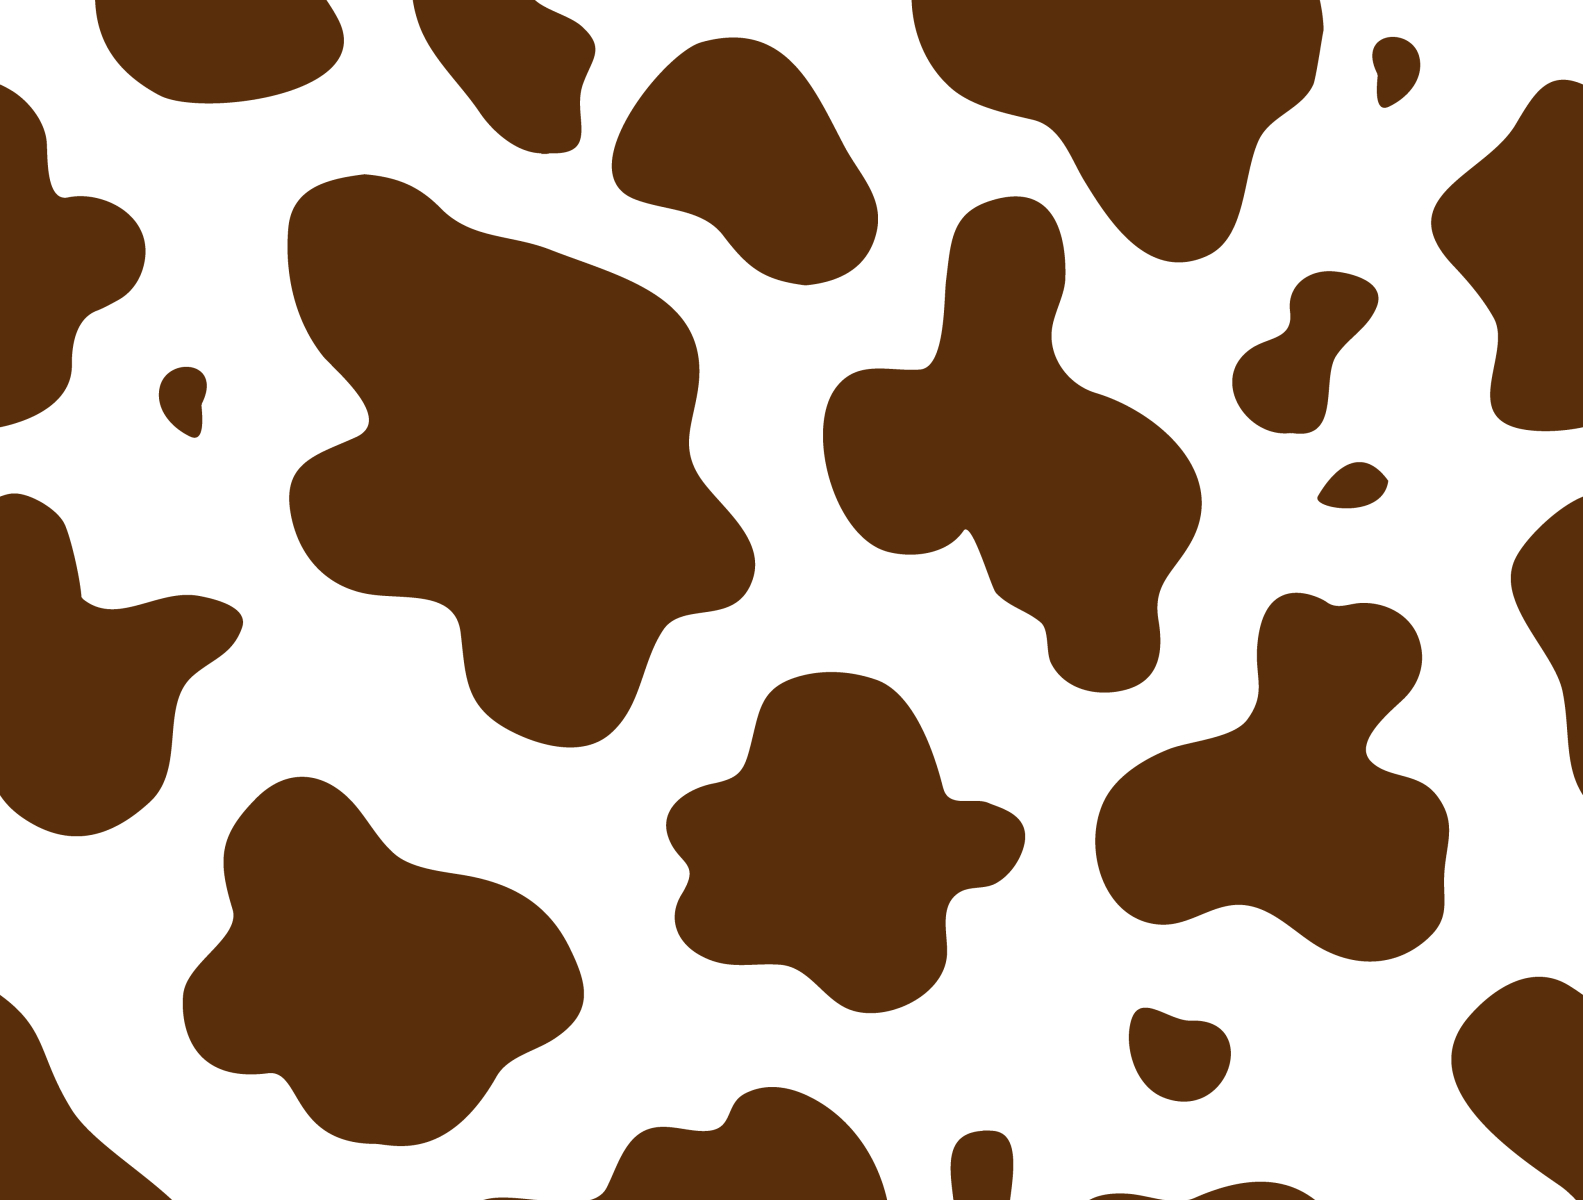 Cotton Cow Print Patterned Animal Print Skin Deep Fabric Print by Yard  D777.37 